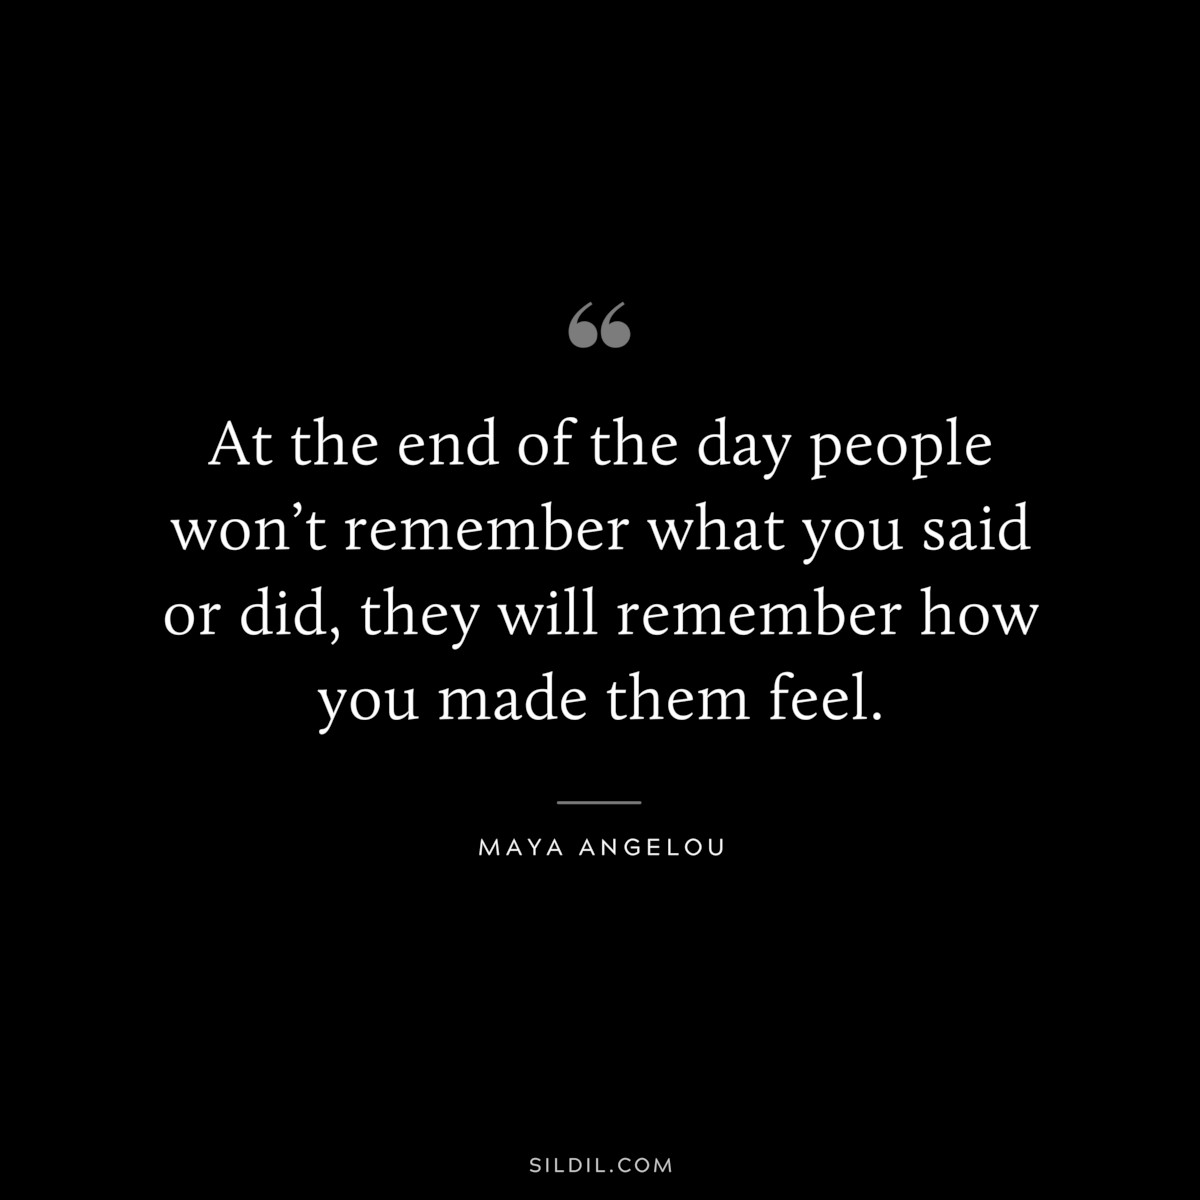 At the end of the day people won’t remember what you said or did, they will remember how you made them feel. ― Maya Angelou